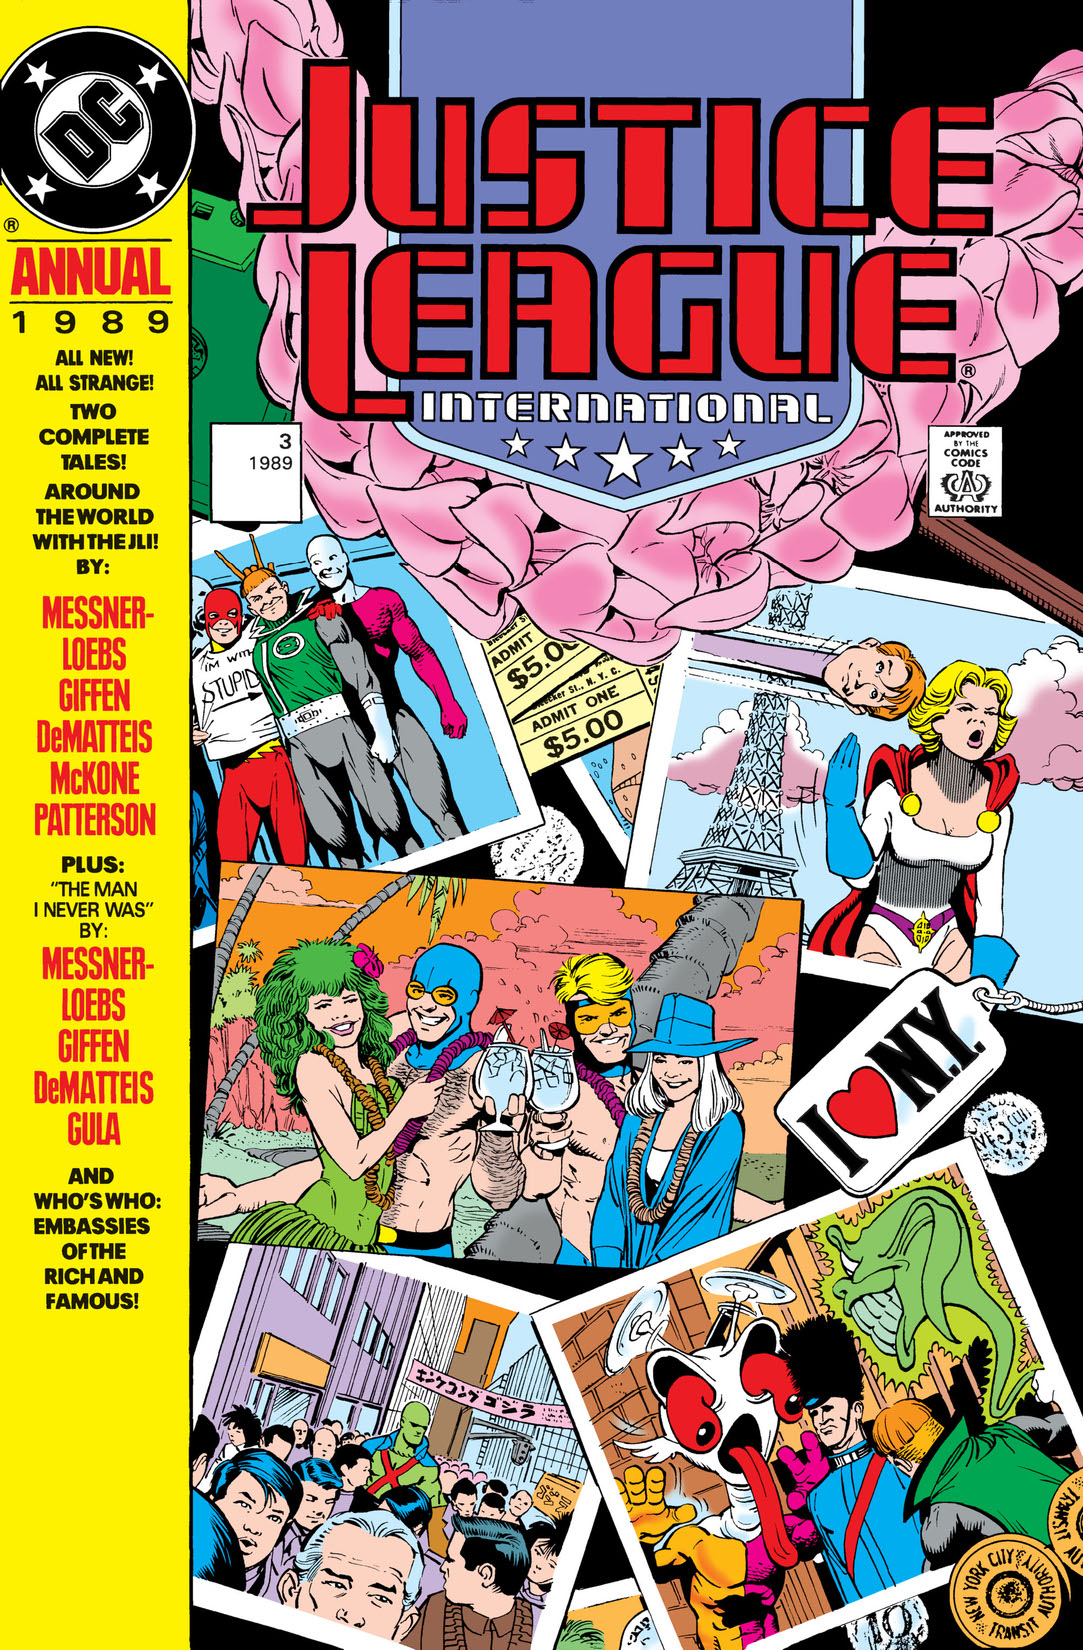 Justice League International Annual (1990-) #3 preview images